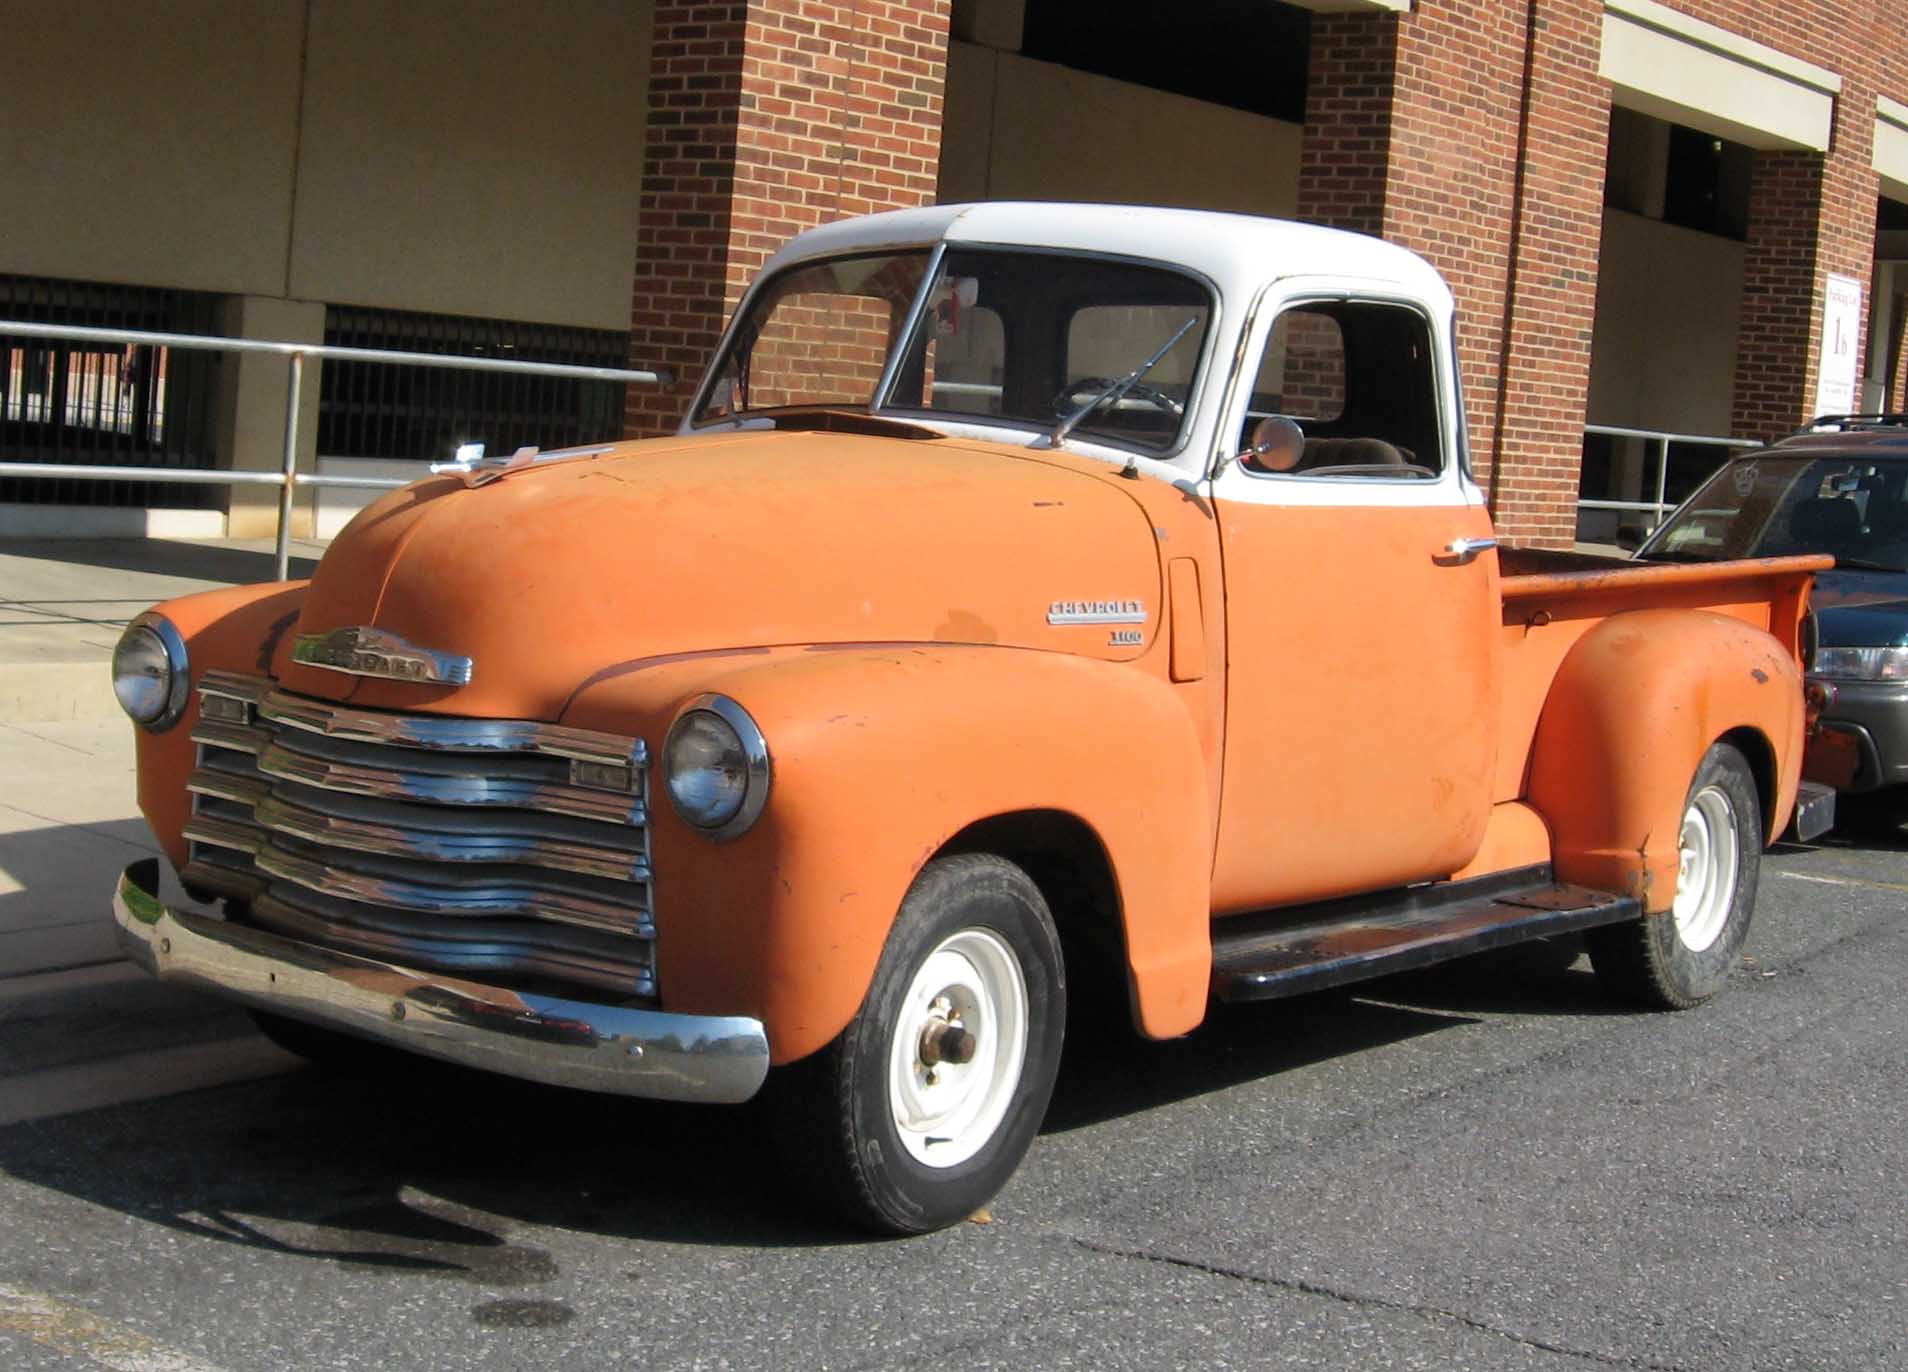 HQ Chevrolet 3100 Wallpapers | File 193.02Kb